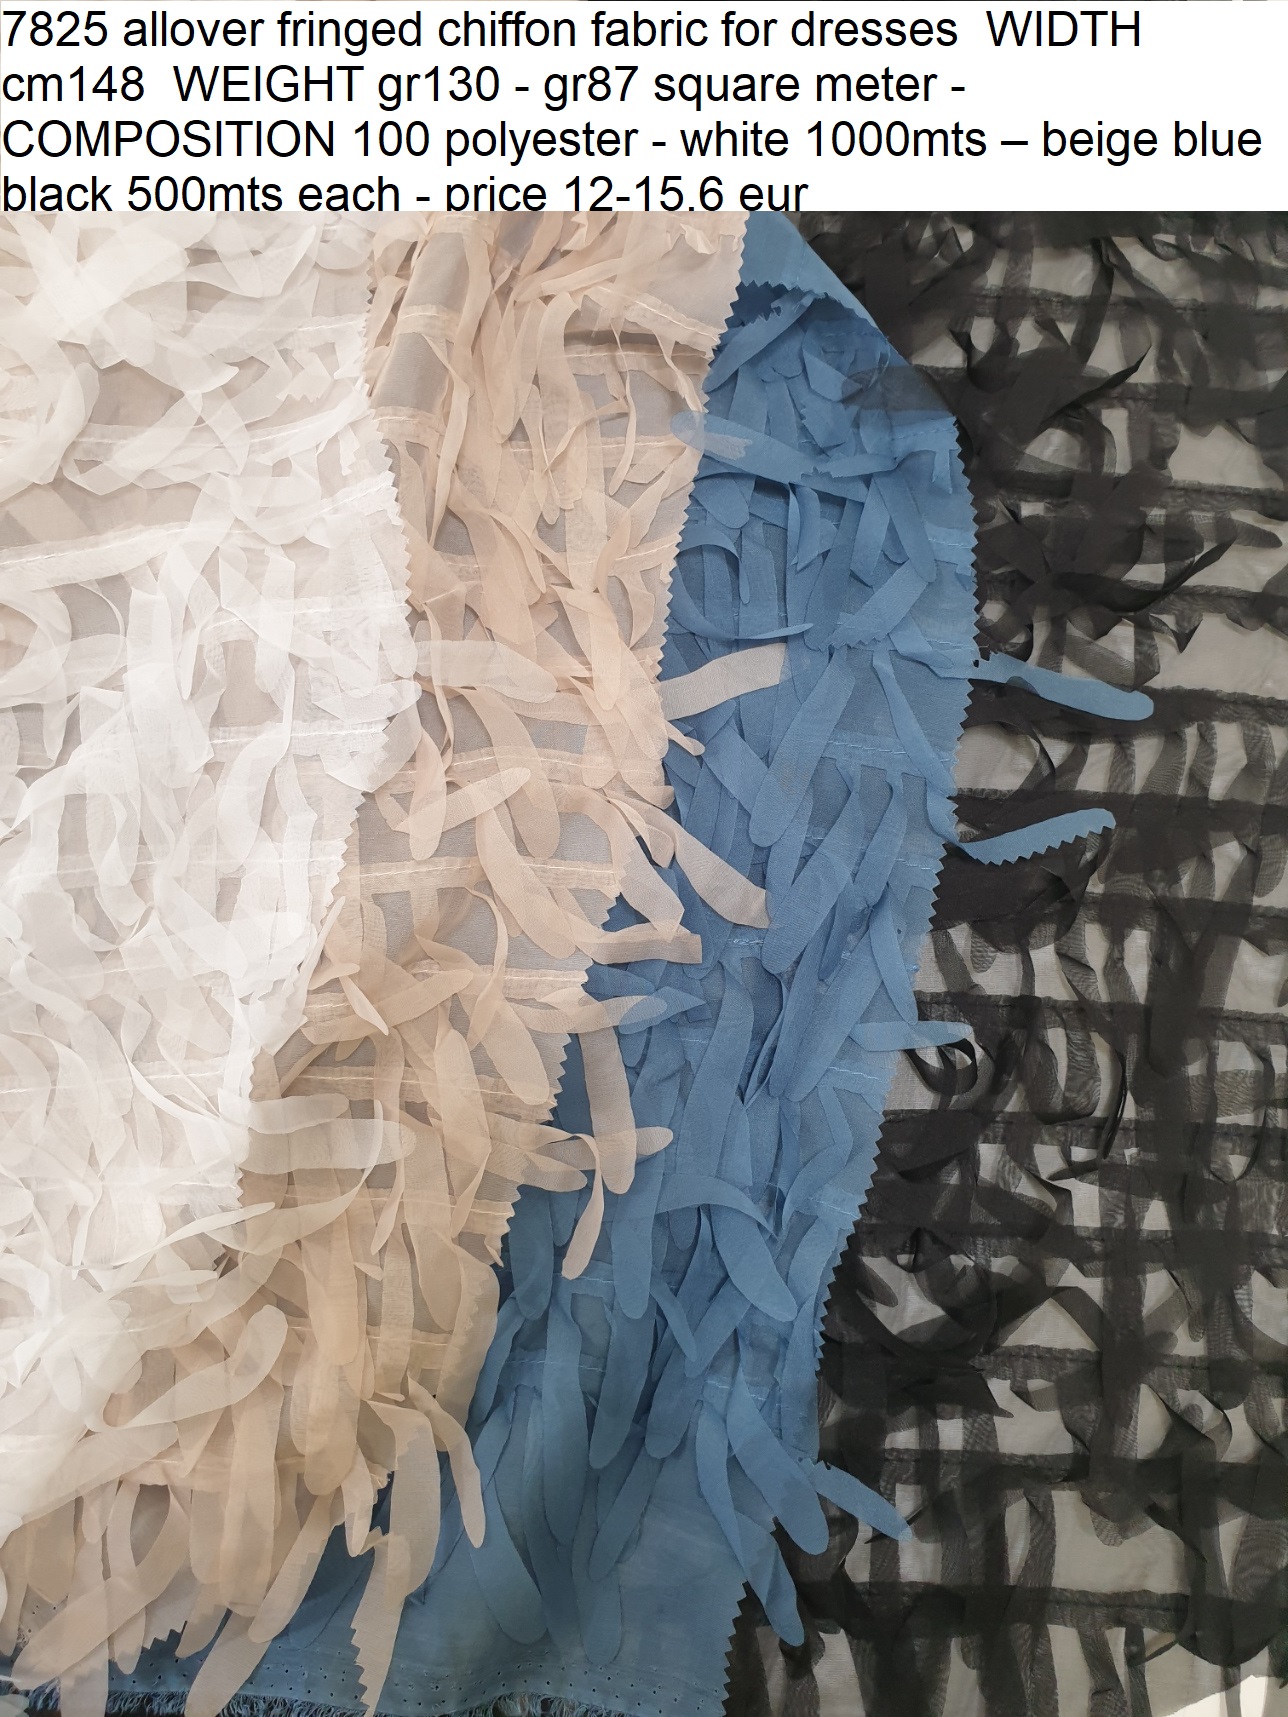 7825 allover fringed chiffon fabric for dresses WIDTH cm148 WEIGHT gr130 - gr87 square meter - COMPOSITION 100 polyester - white 1000mts – beige blue black 500mts each - price 12-15,6 eur